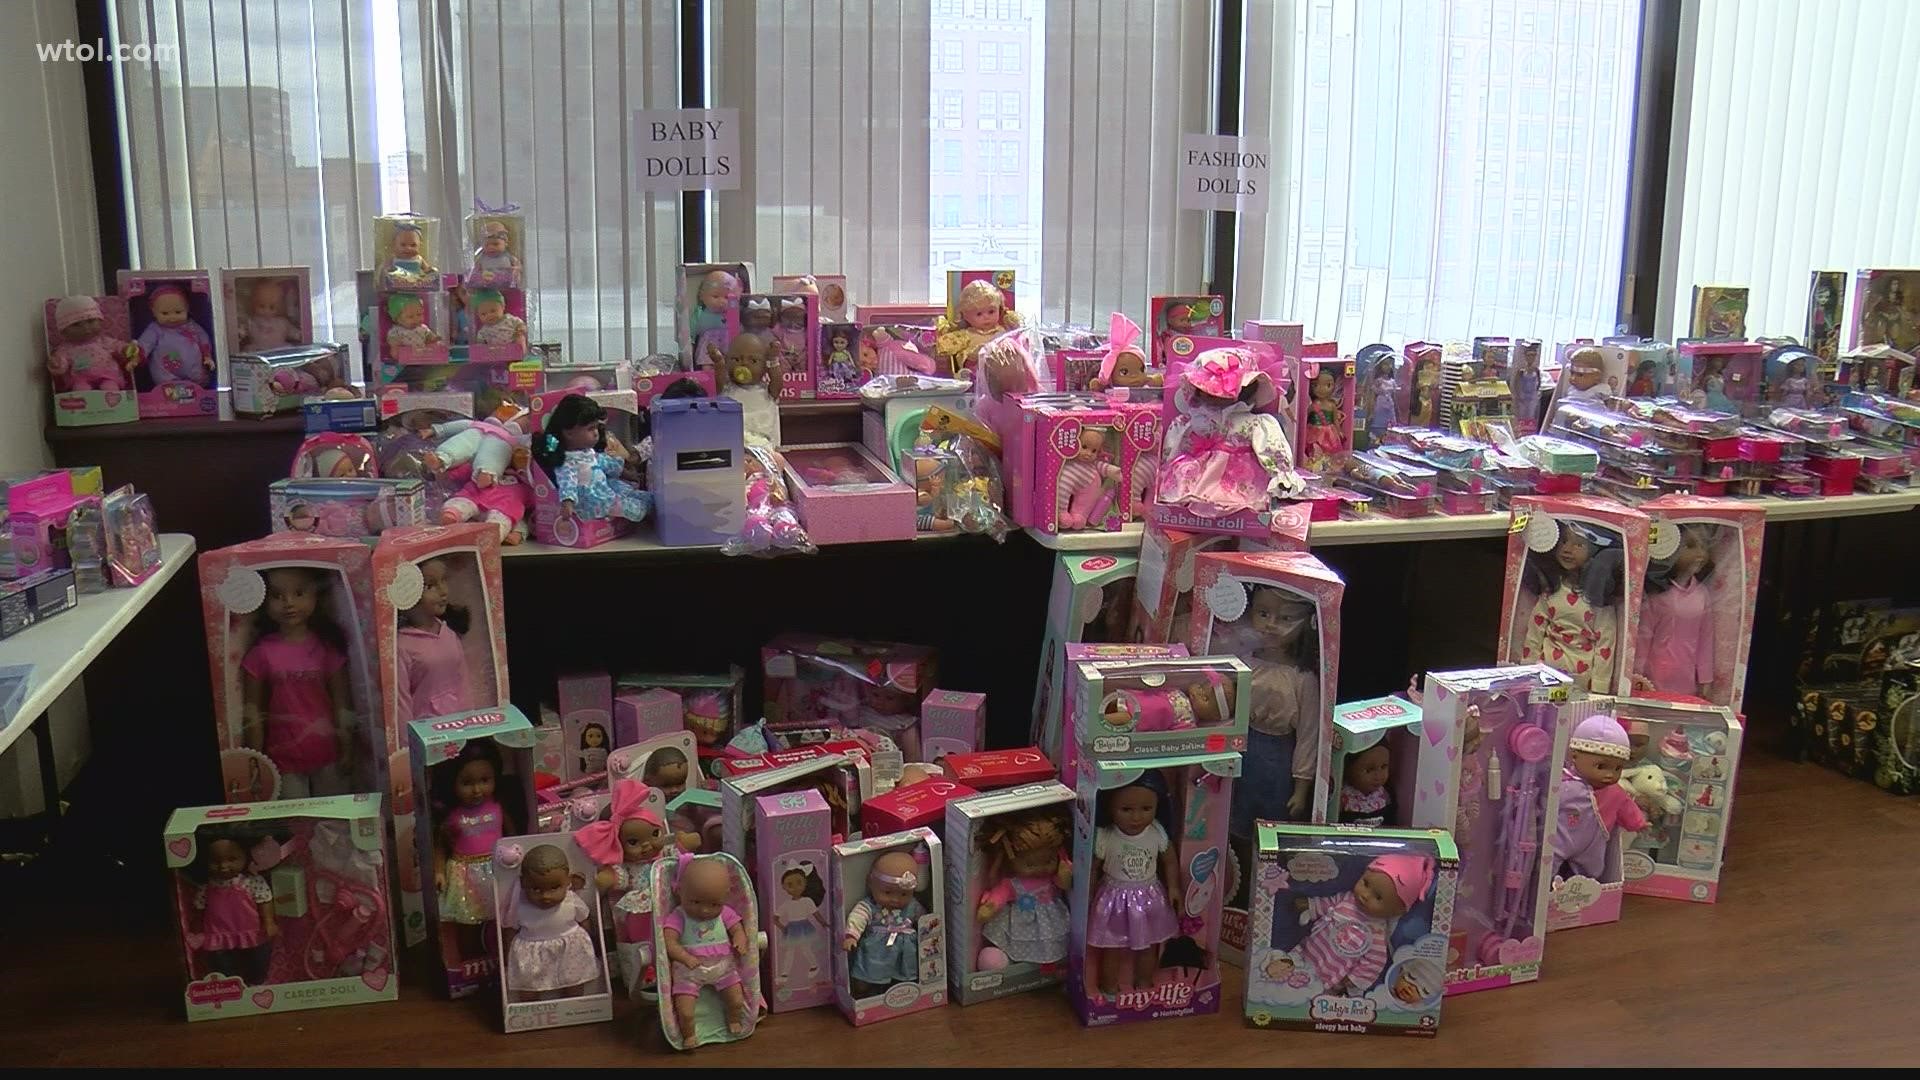 The annual Gift of Joy Downtown Toy drop happening at WTOL 11 is just two days away!